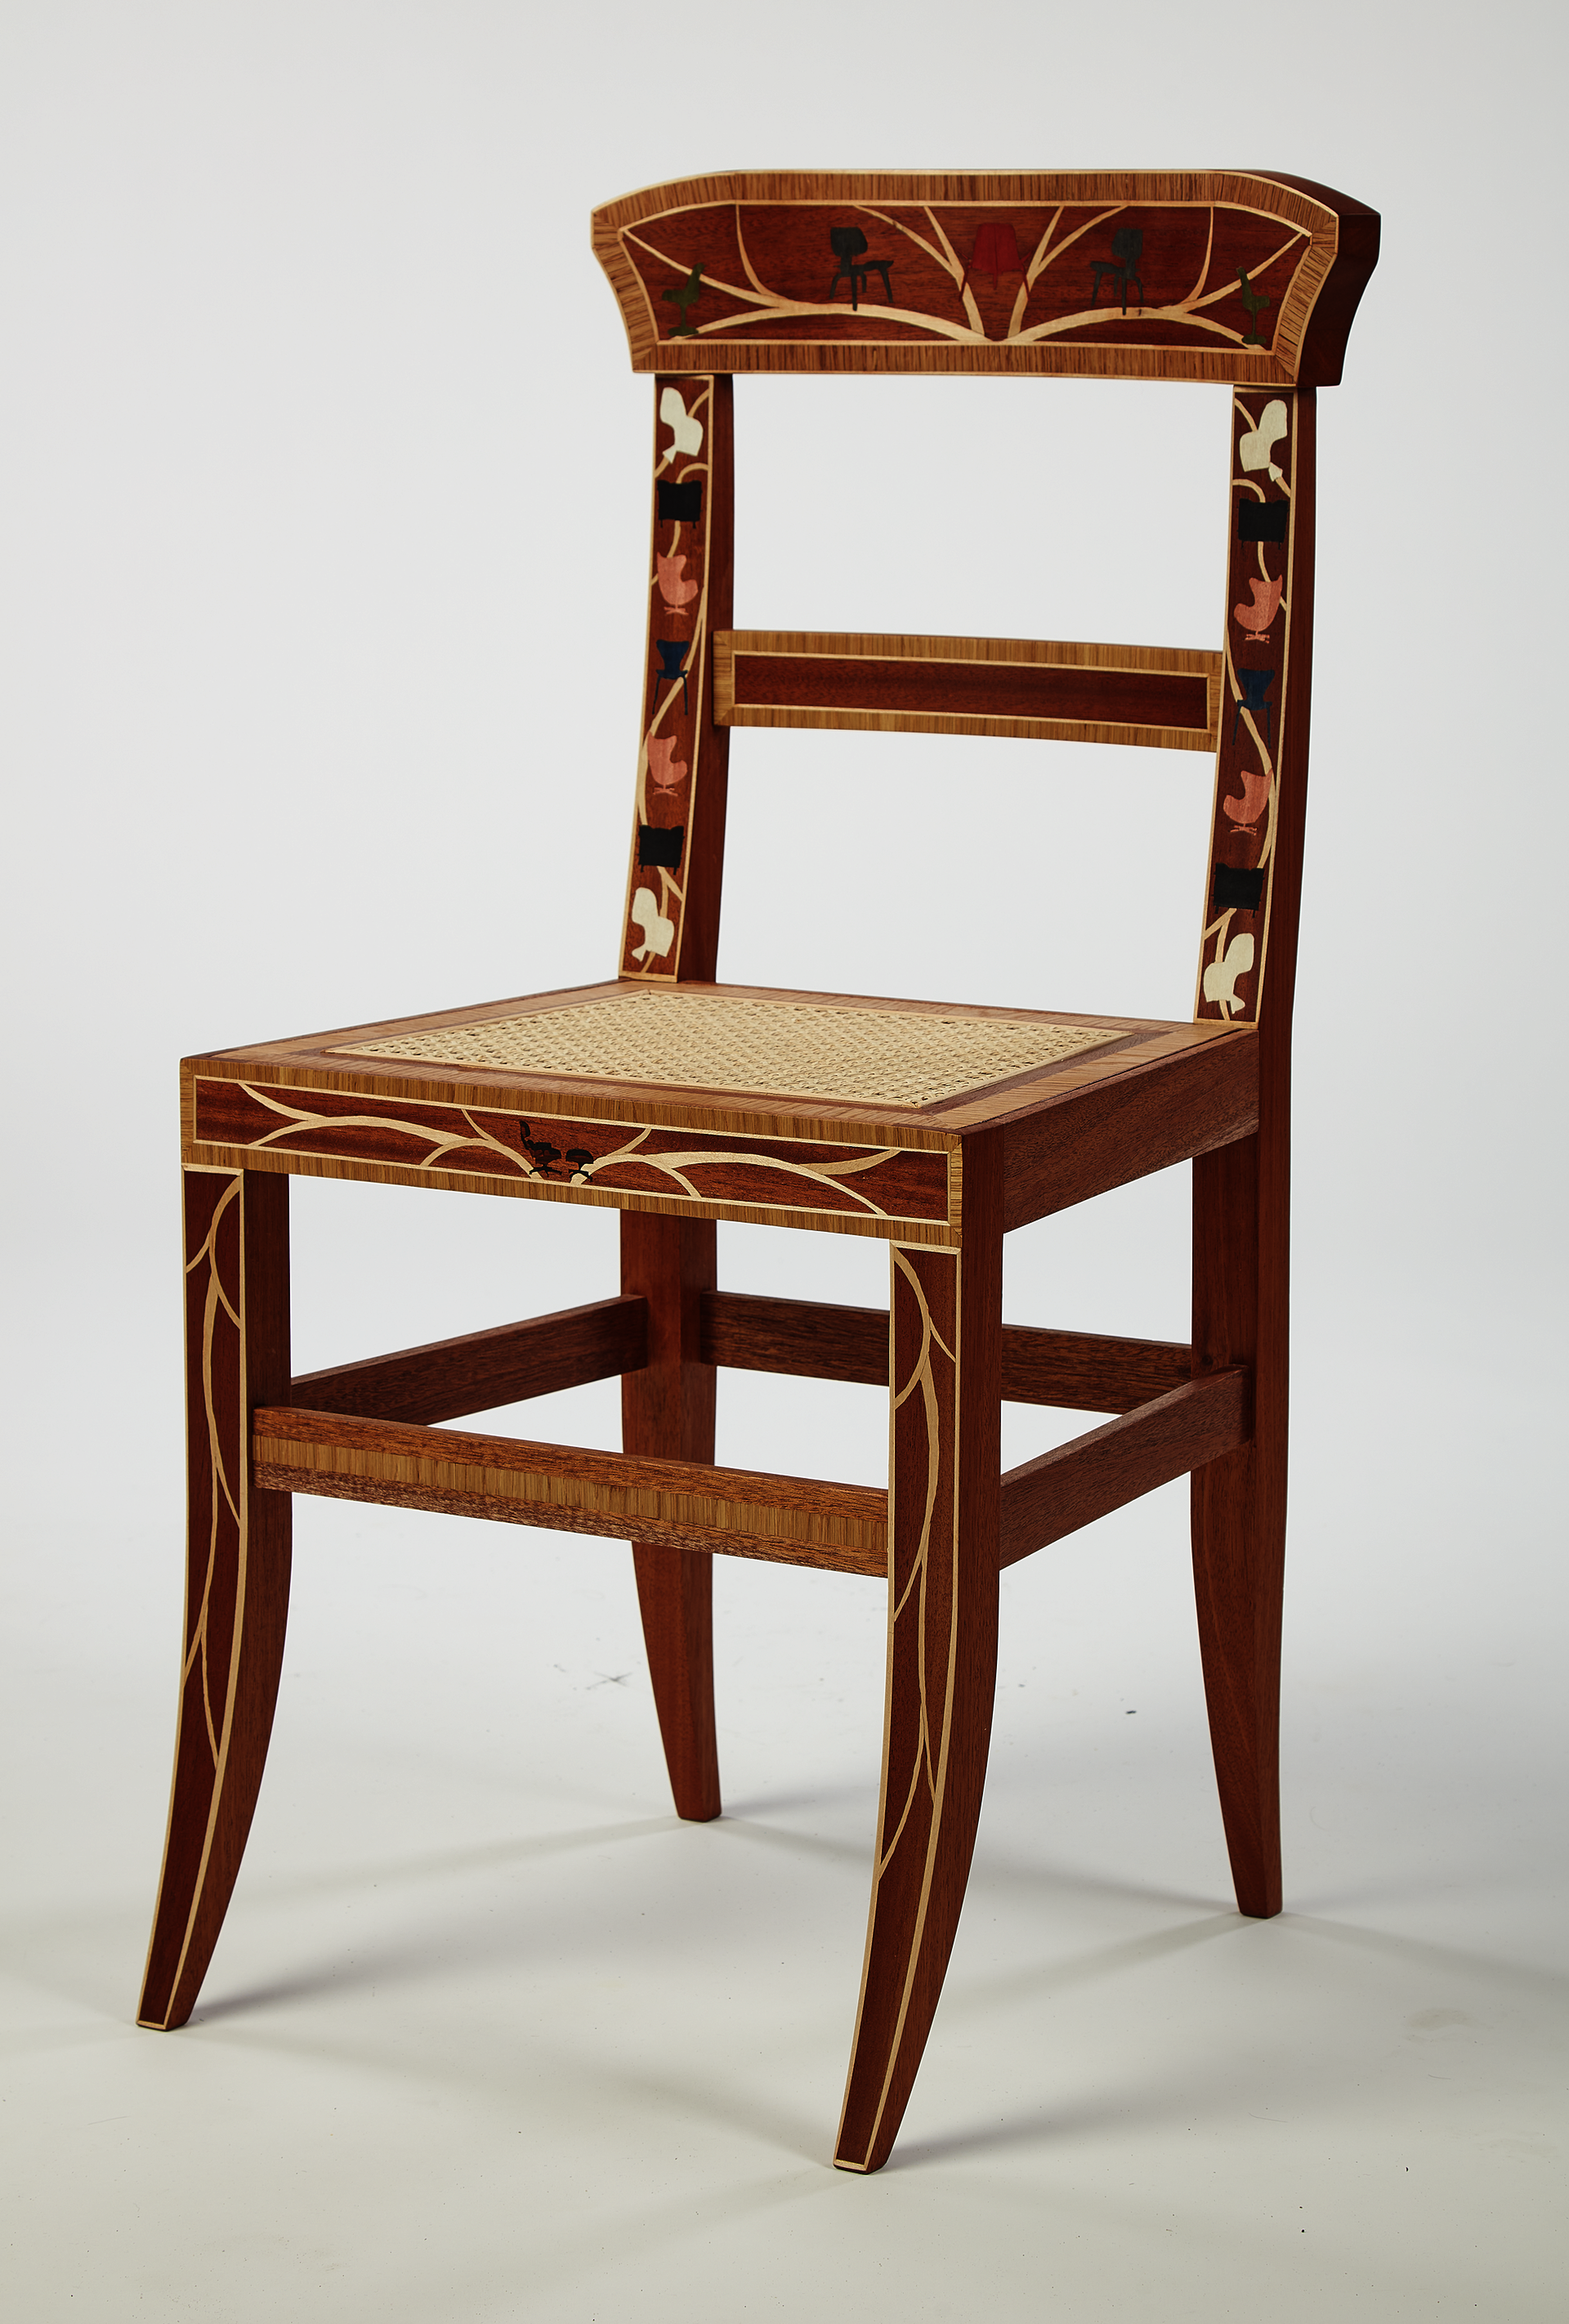 Mahogany chair in an antique style viewed from three-quarter orientation. Colorful inlays in the shape of modern chairs cover and decorate the surface.